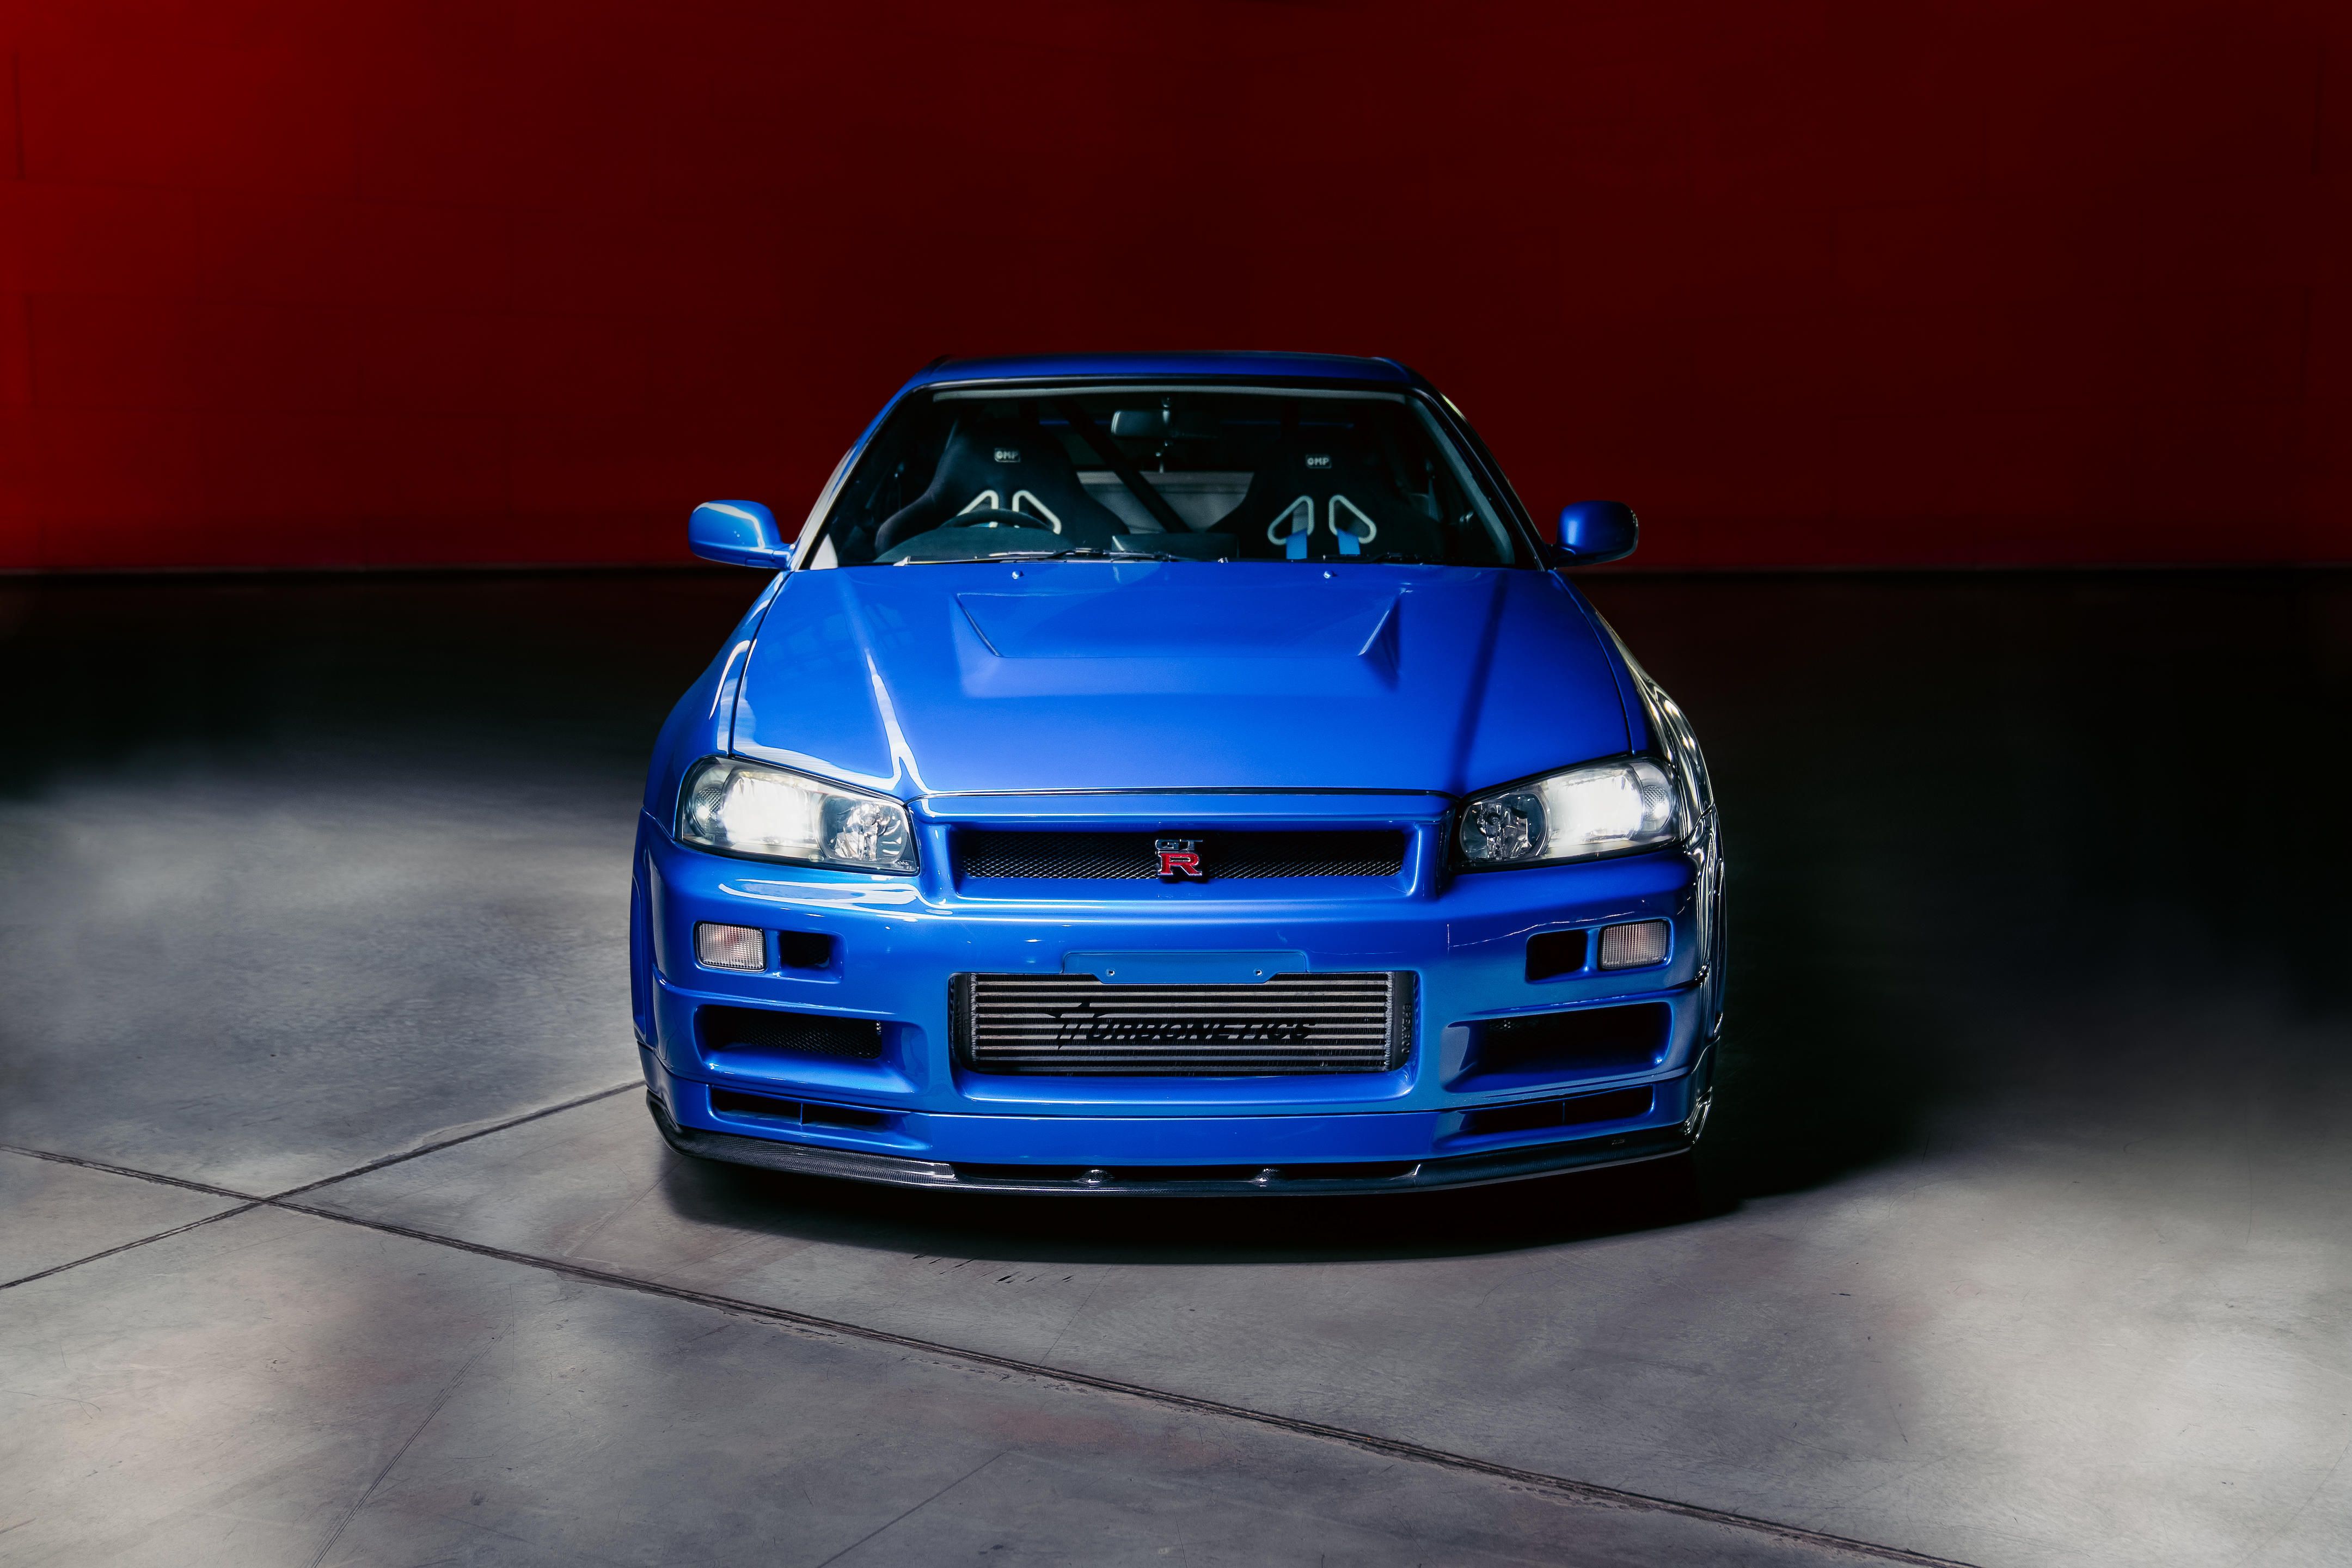 Paul Walker's Fast and Furious R34 Skyline GT-R Just Sold for